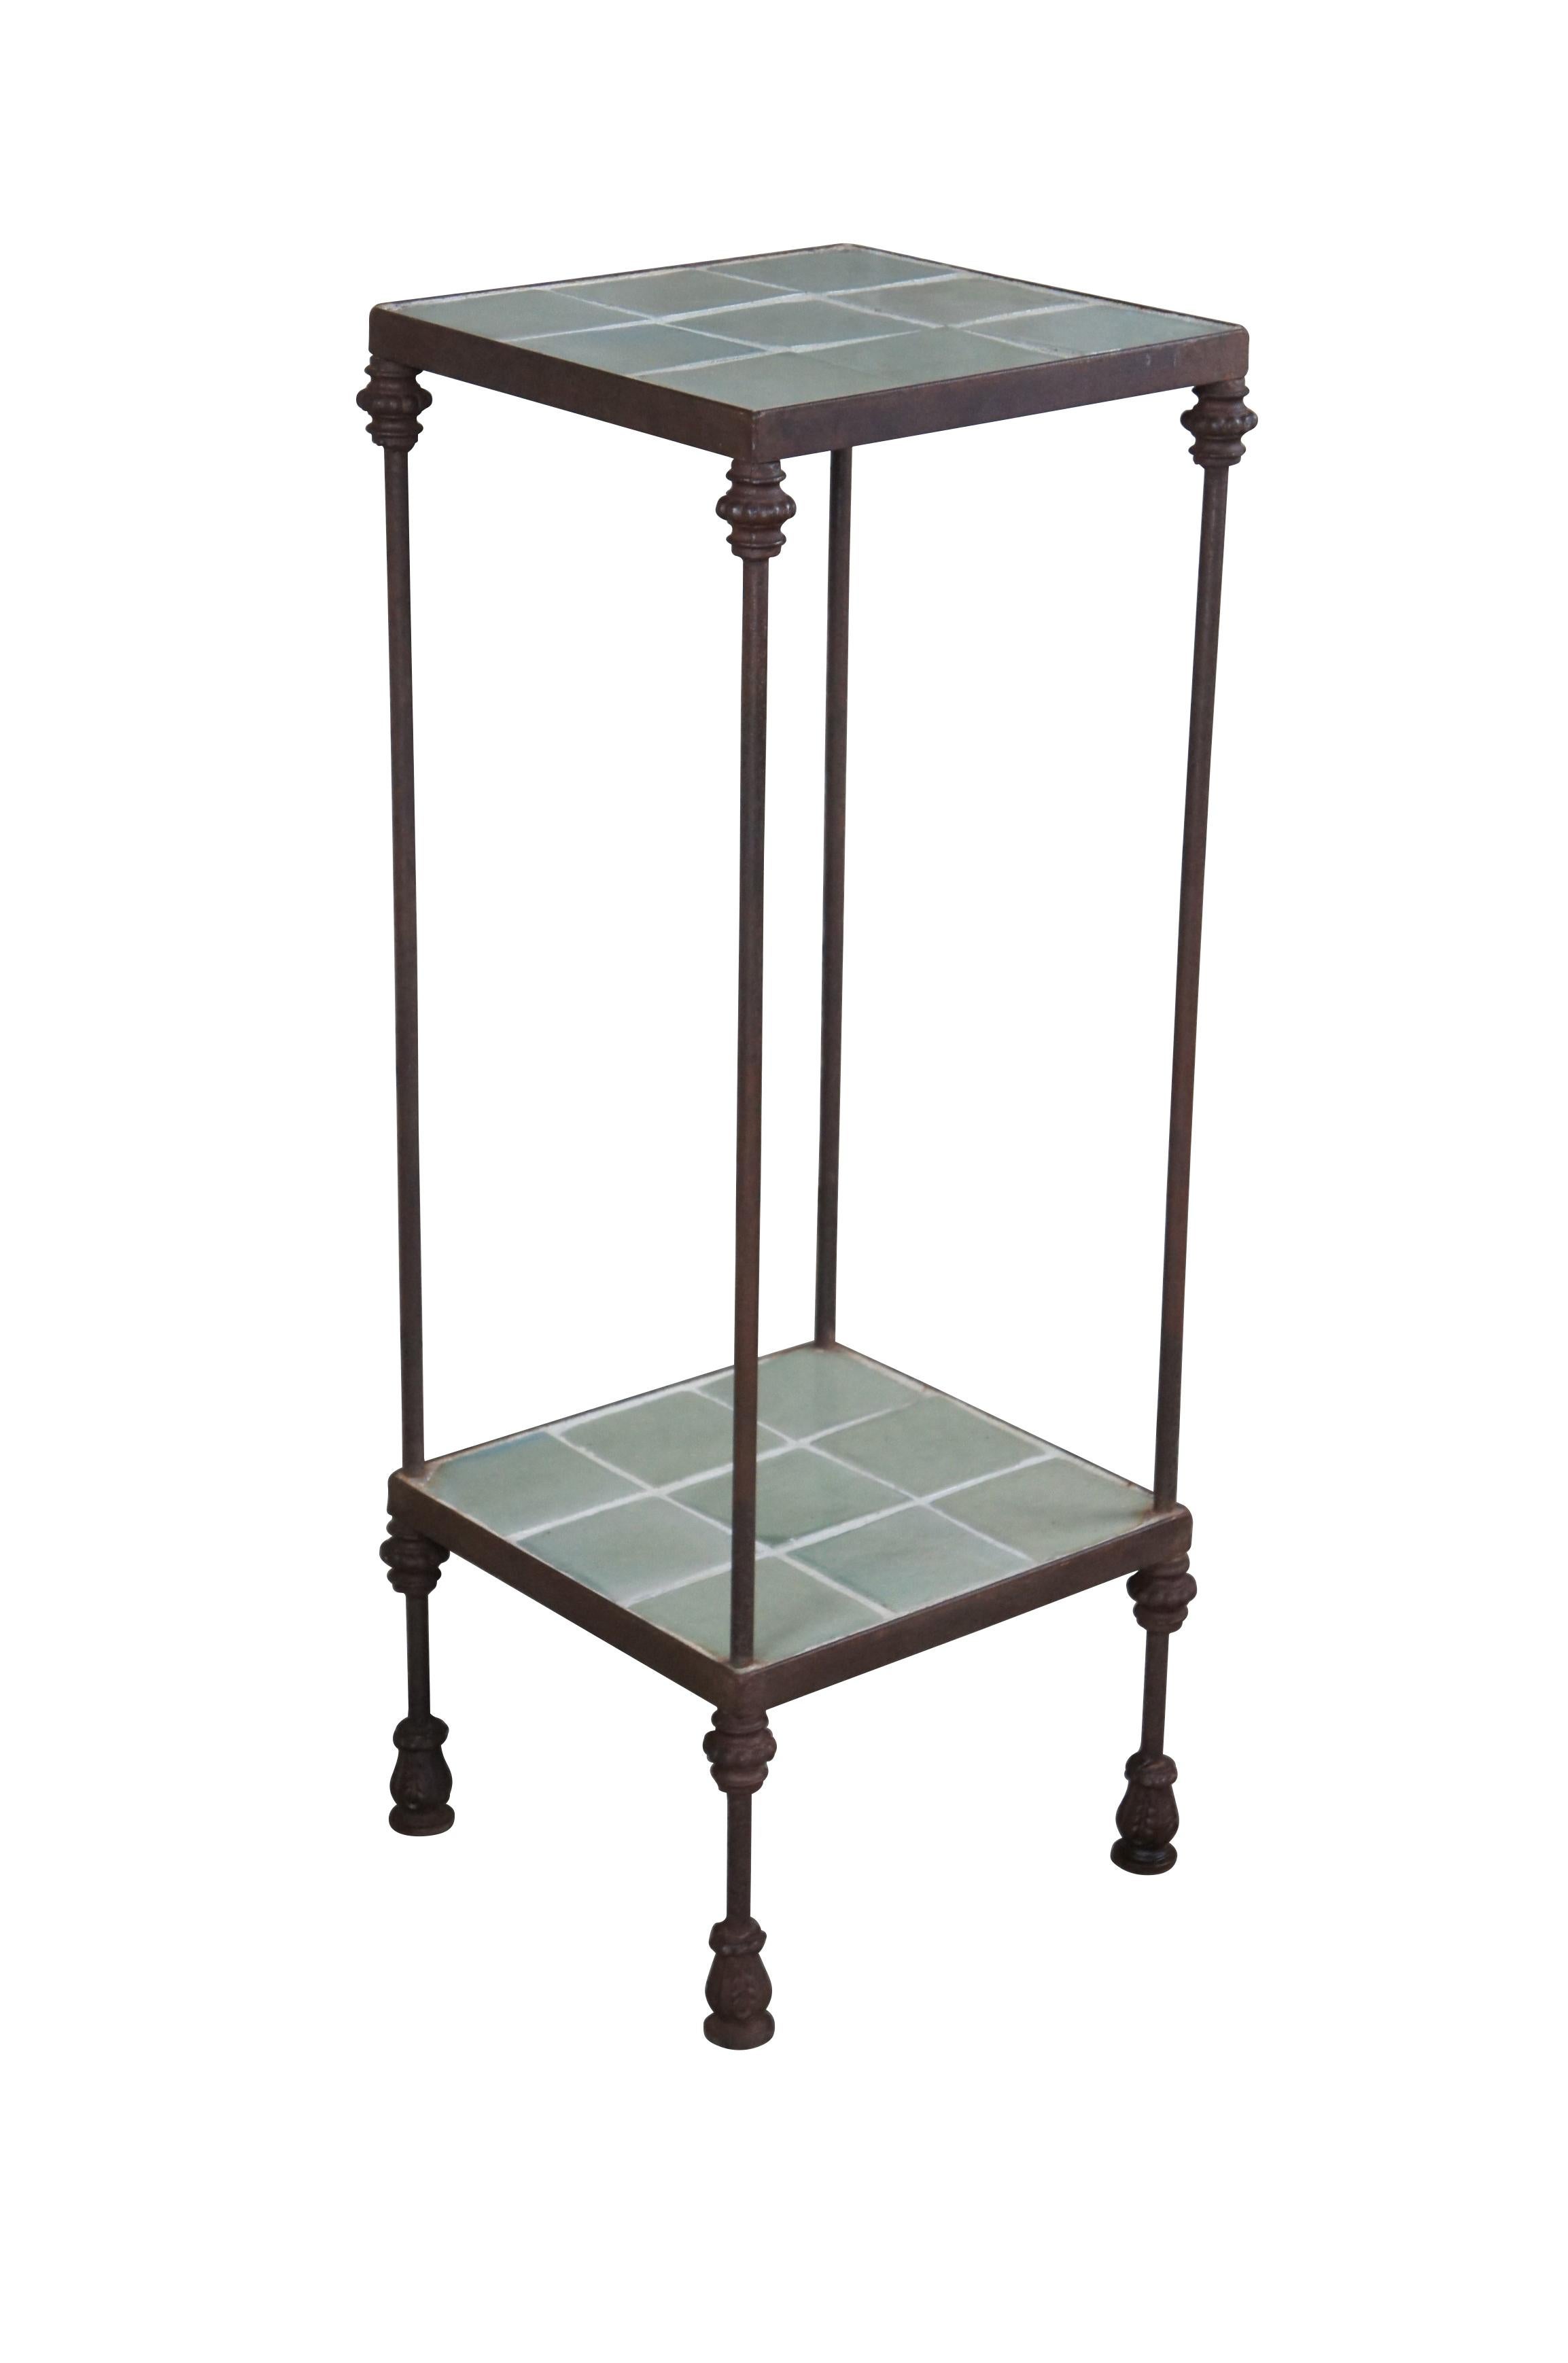 Mid 20th century iron pedestal or stand.  Features a tall open two tier frame with green tiled surfaces.  Great for display of plant or sculptures.  

Dimensions:
14